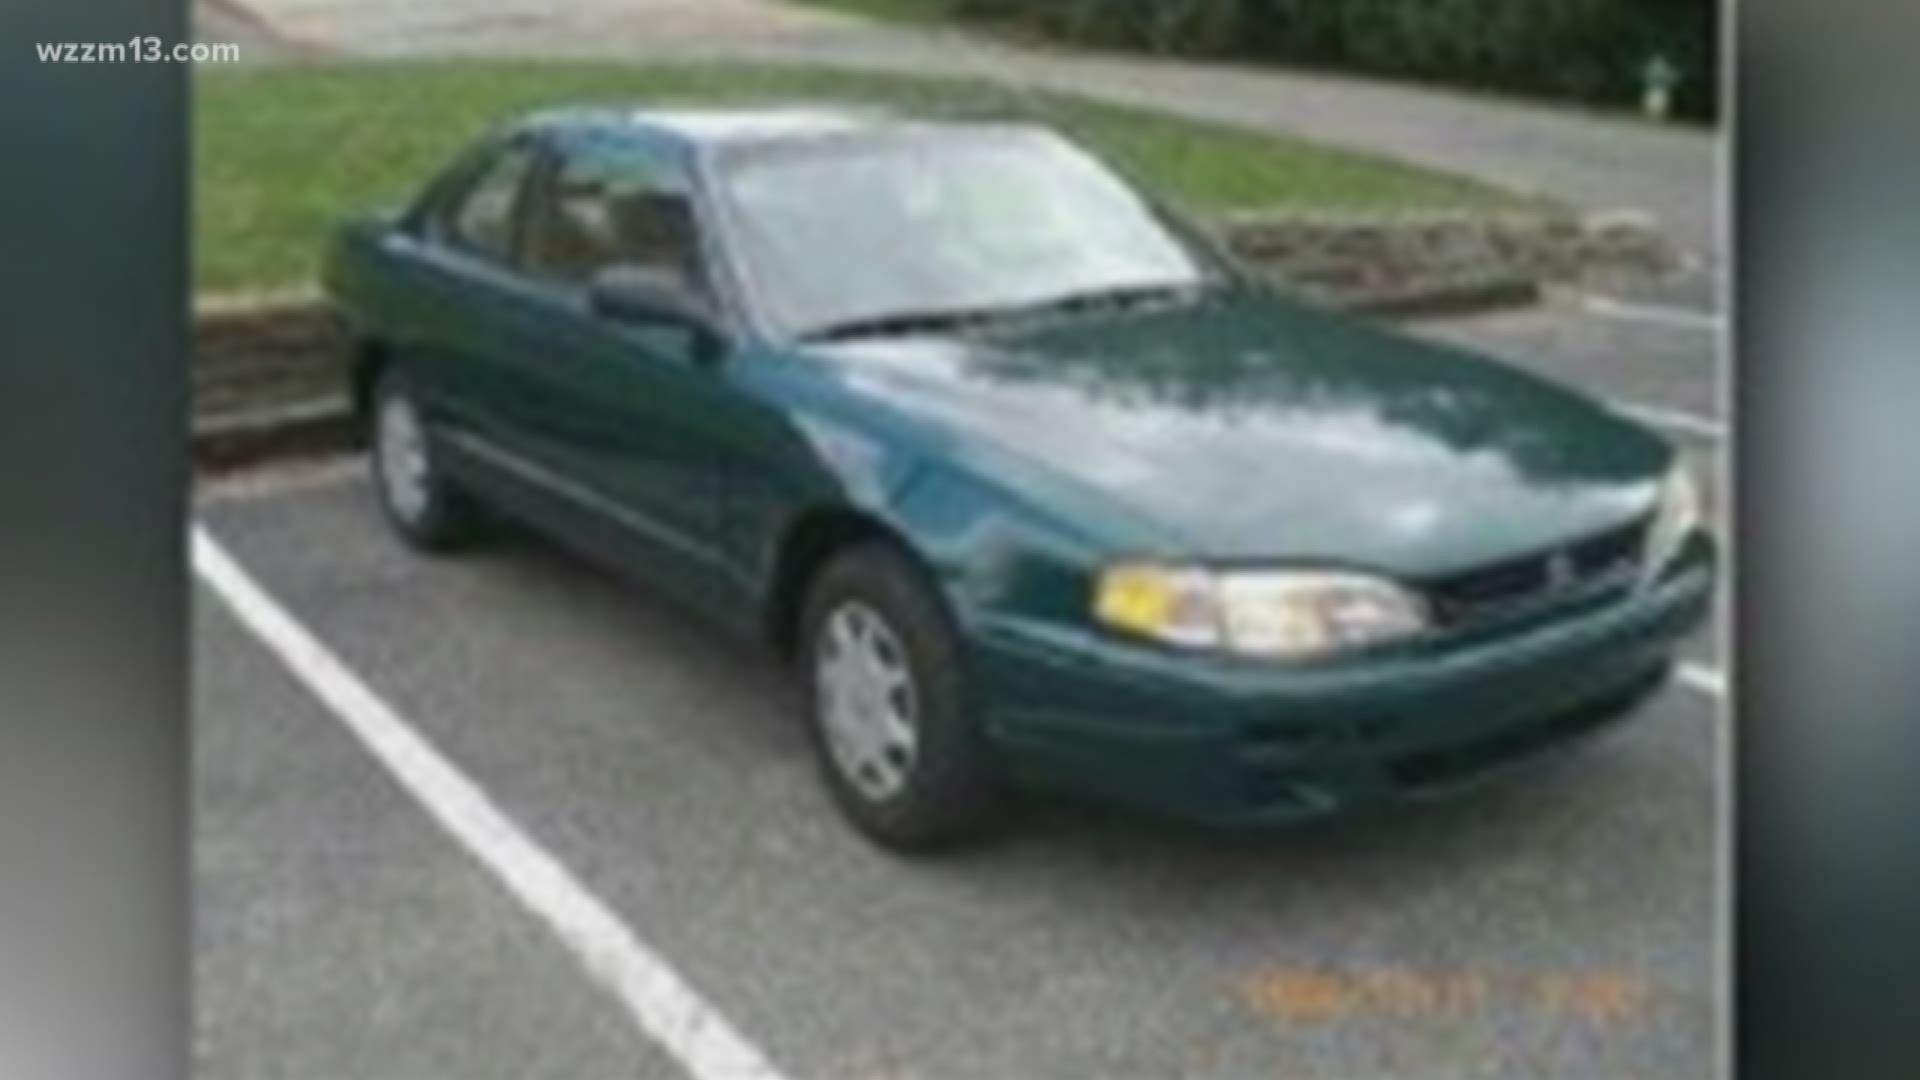 Stolen car may be connected to gas station robberies